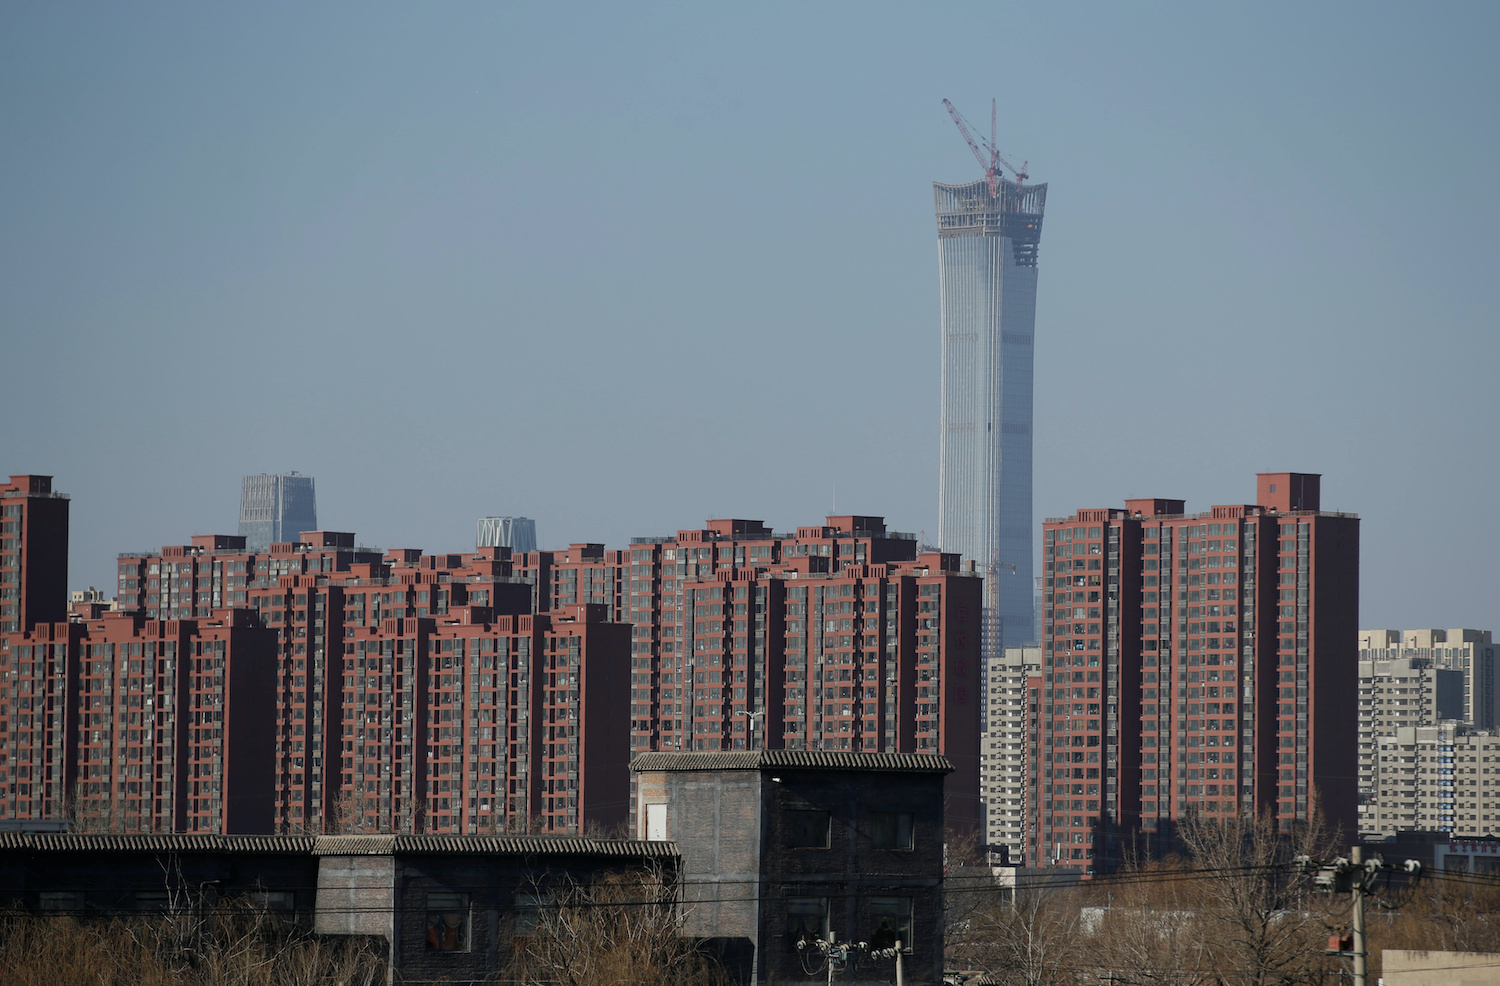 China’s Plunging Property Market to Deliver a ‘Severe Blow’ to Growth: Nomura